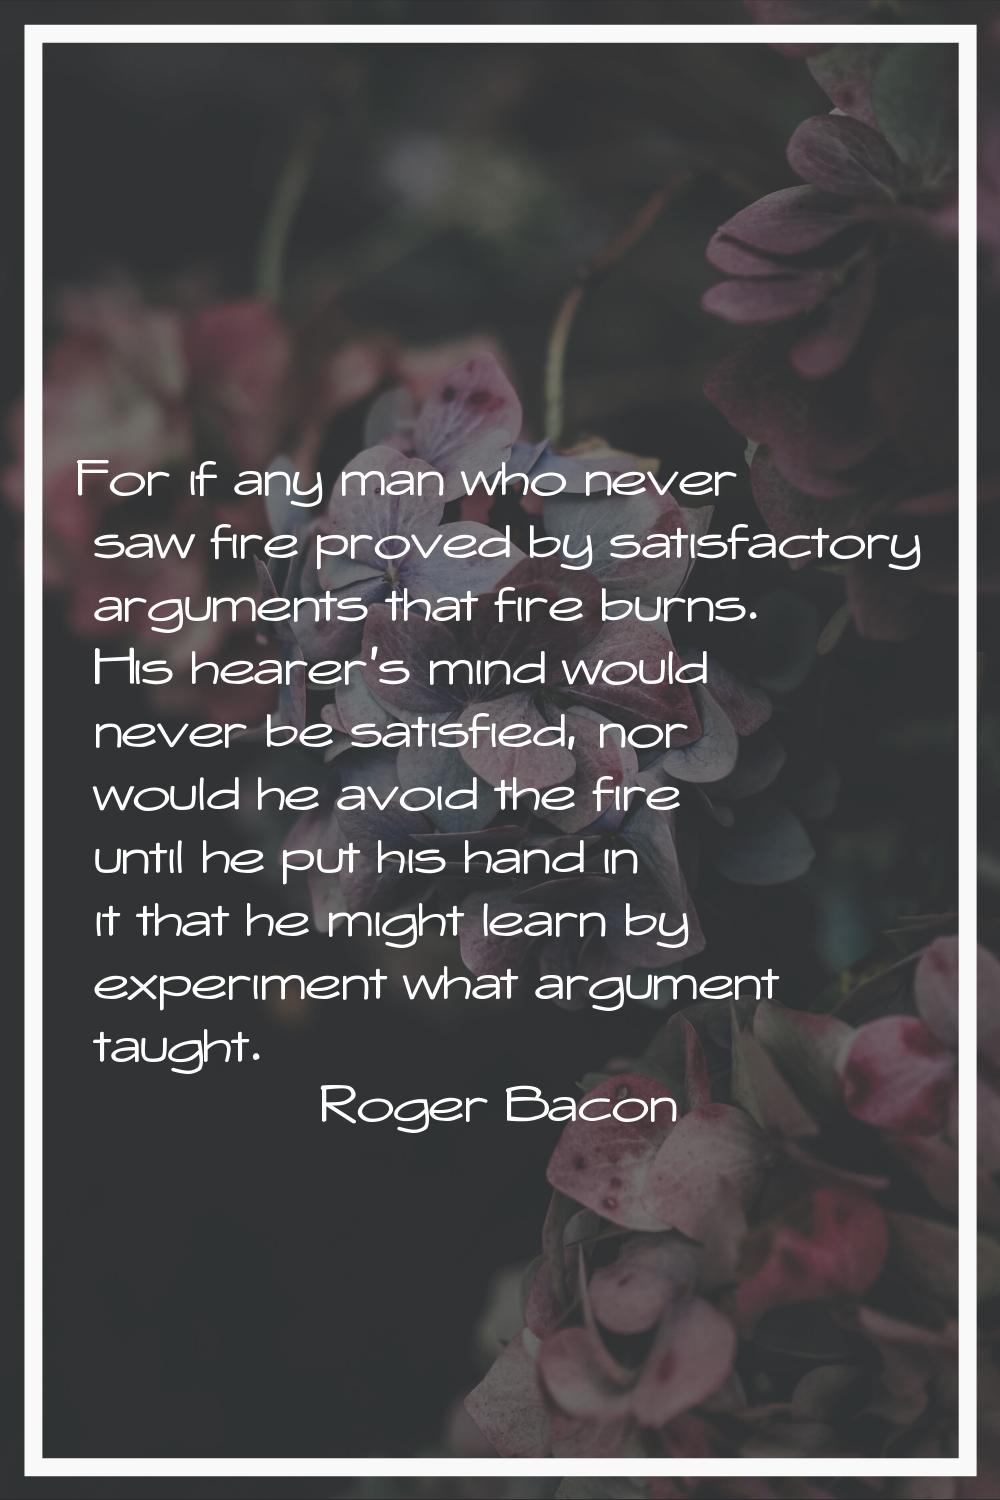 For if any man who never saw fire proved by satisfactory arguments that fire burns. His hearer's mi